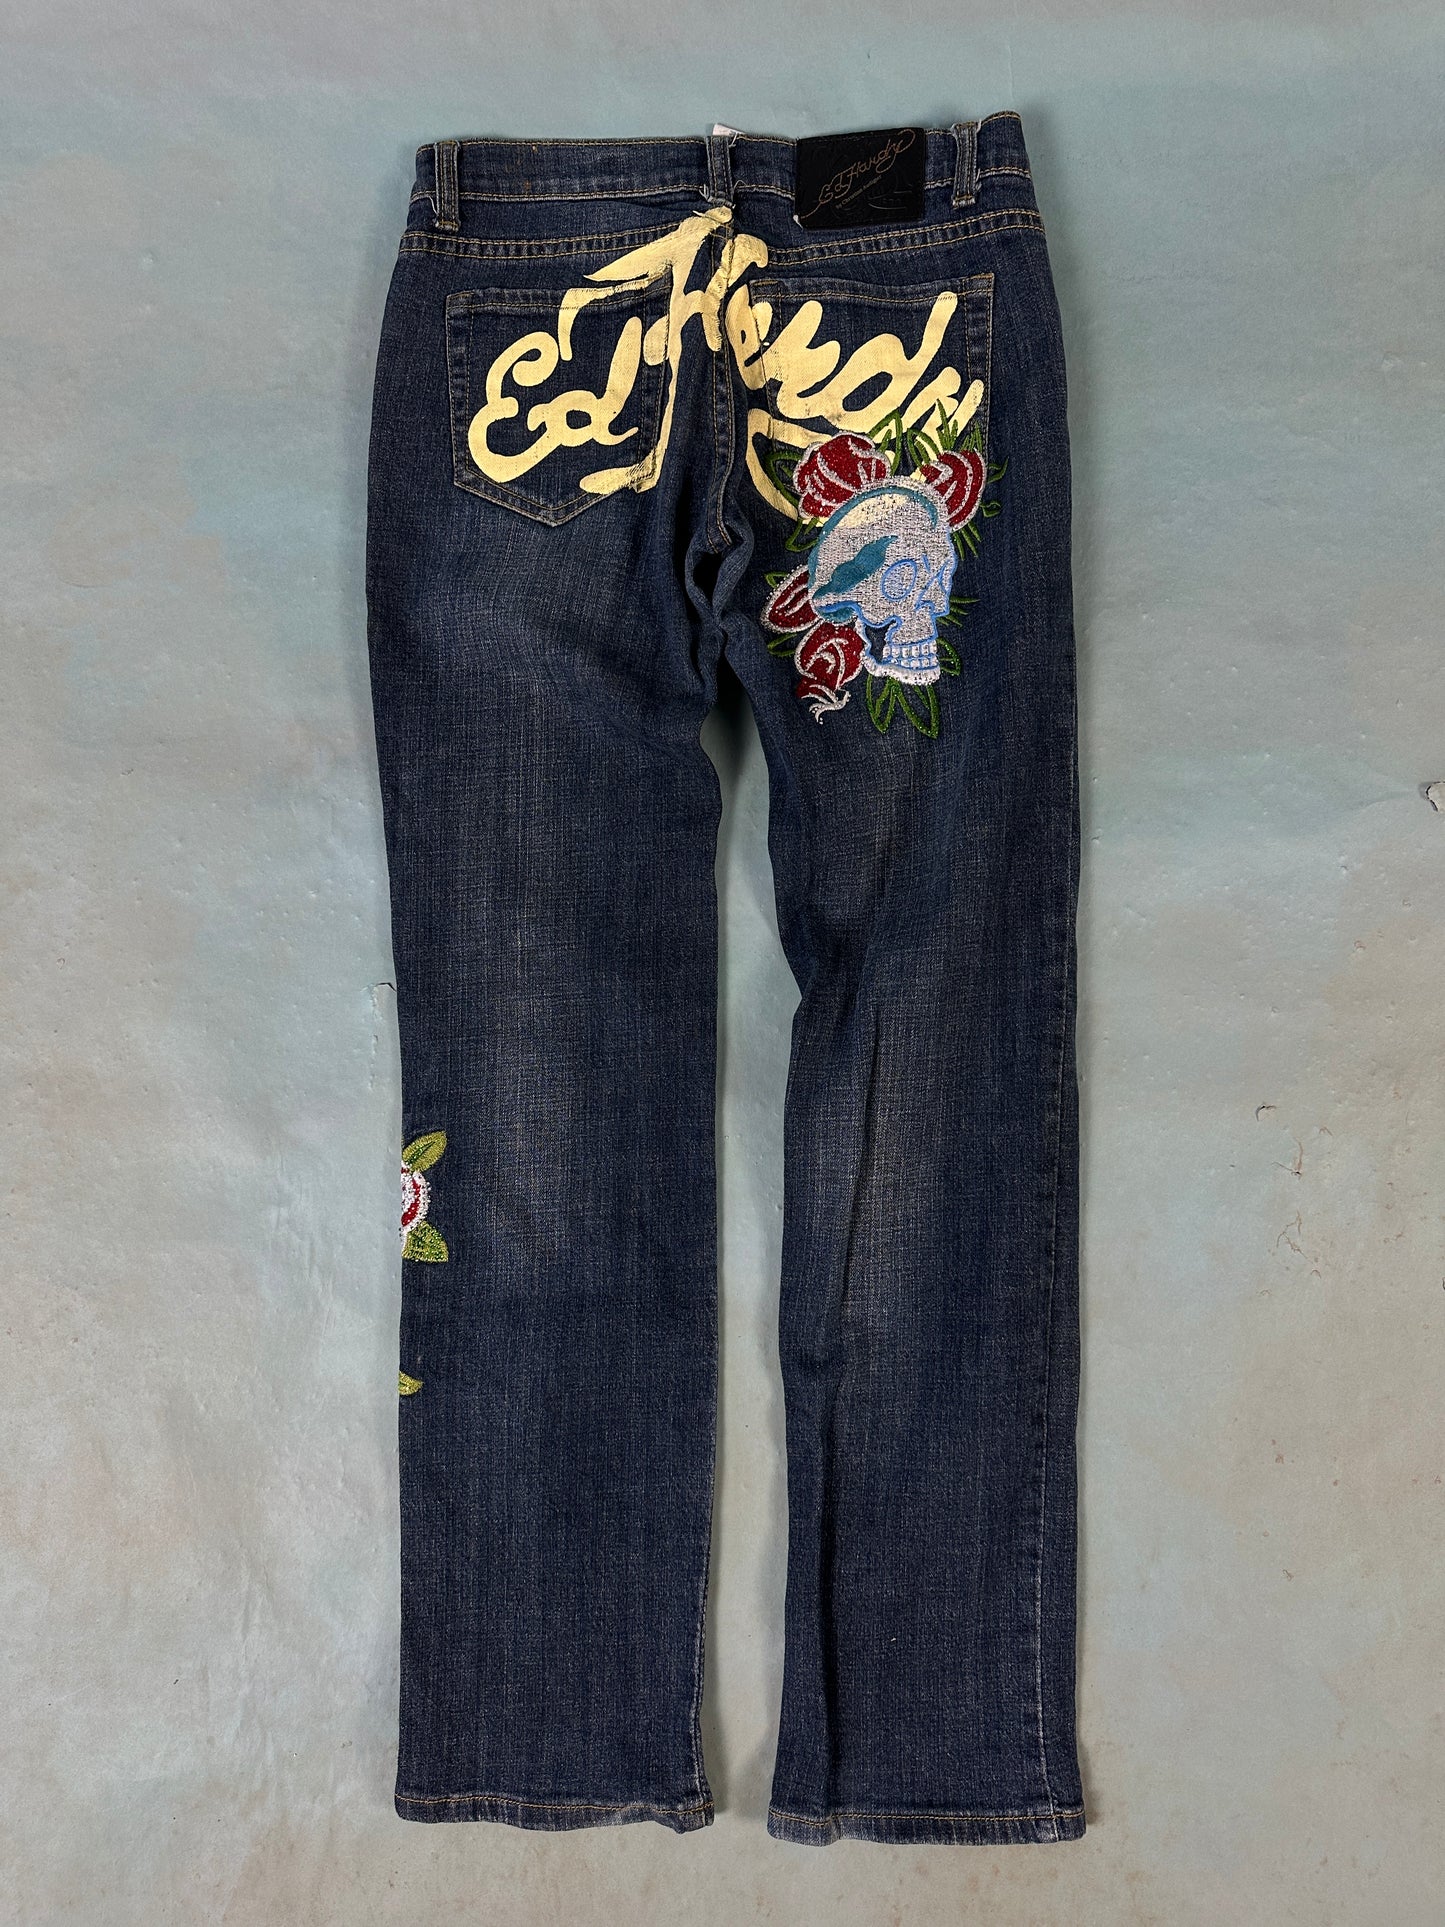 Ed Hardy Spell Out Skull Vintage Jeans - 28